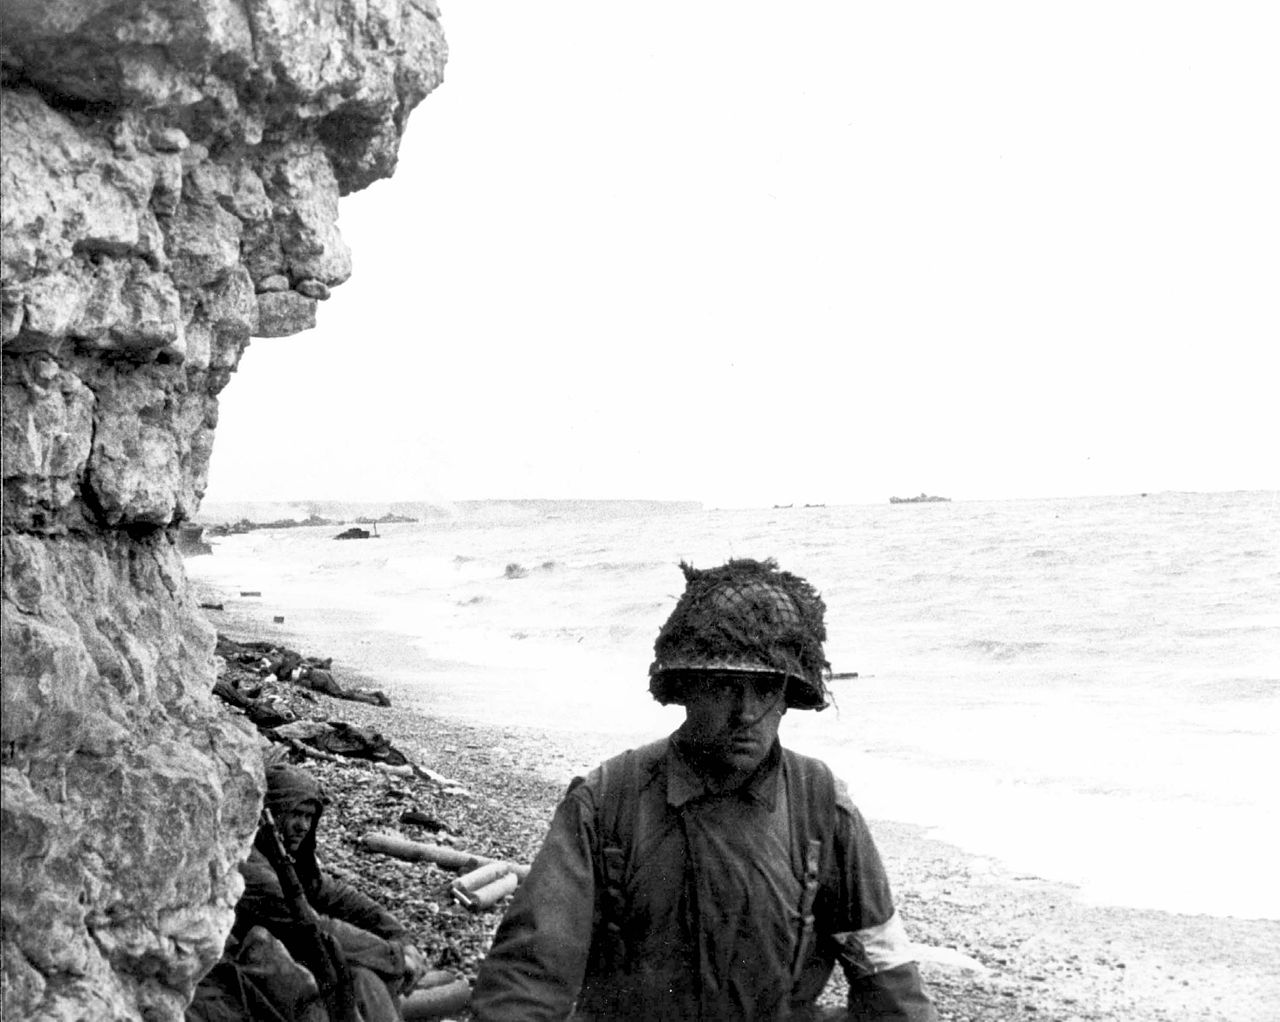 A medic of the 3d Bn., 16th Inf. Regt., 1st U.S. Inf. Div., moves along a narrow strip of Omaha Beach administering first aid to men wounded in the landing.